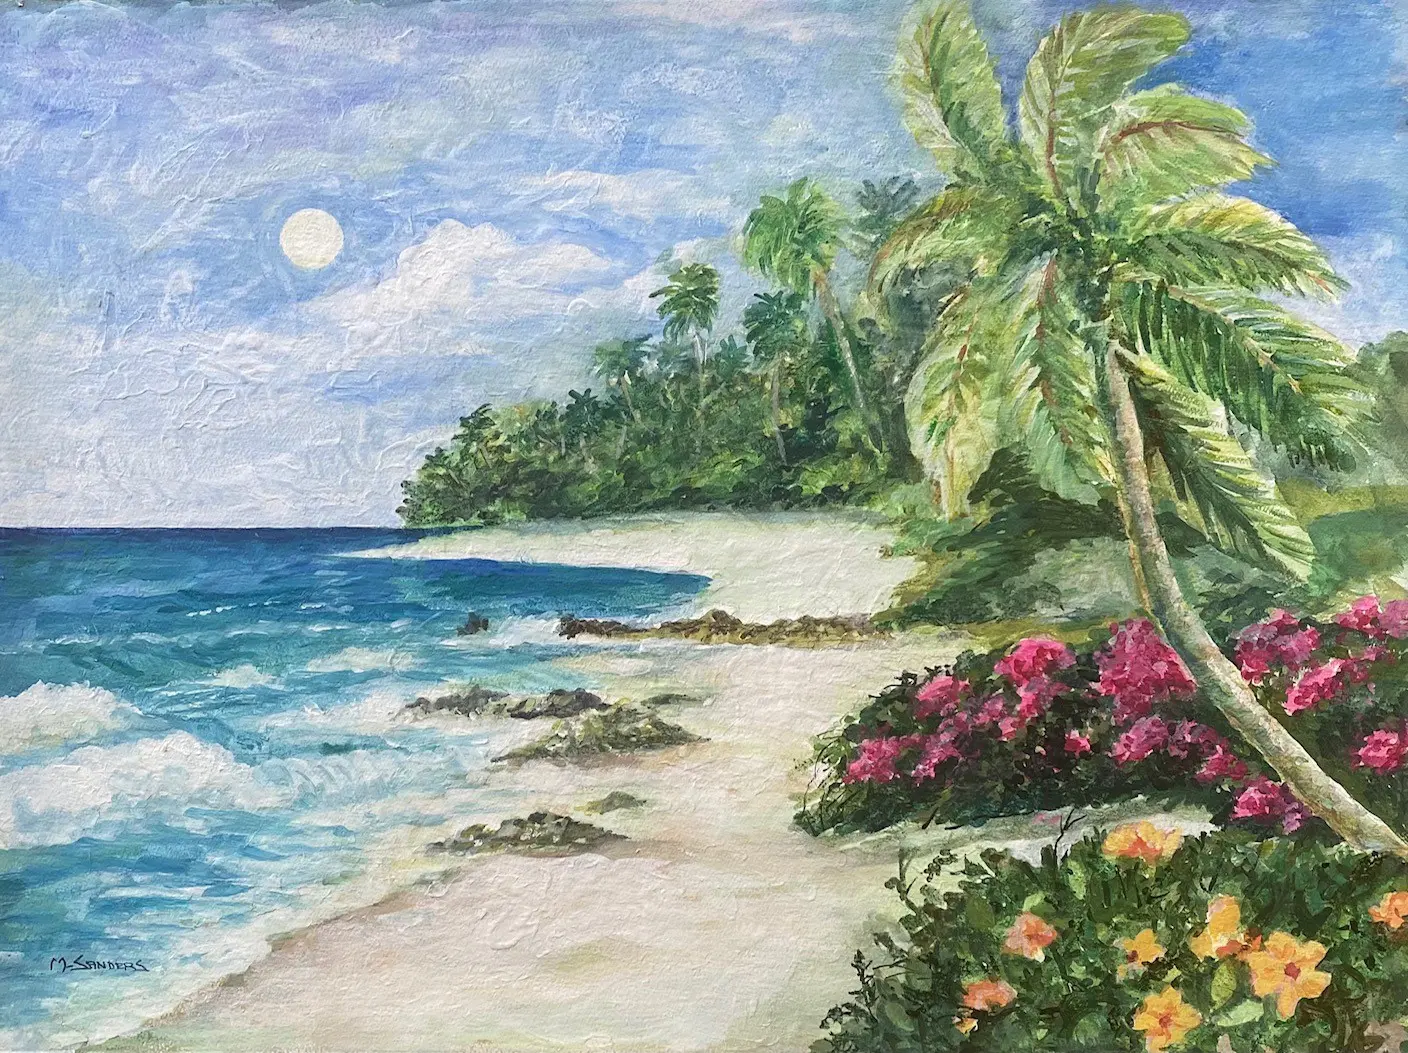 A painting of the beach with flowers and palm trees.